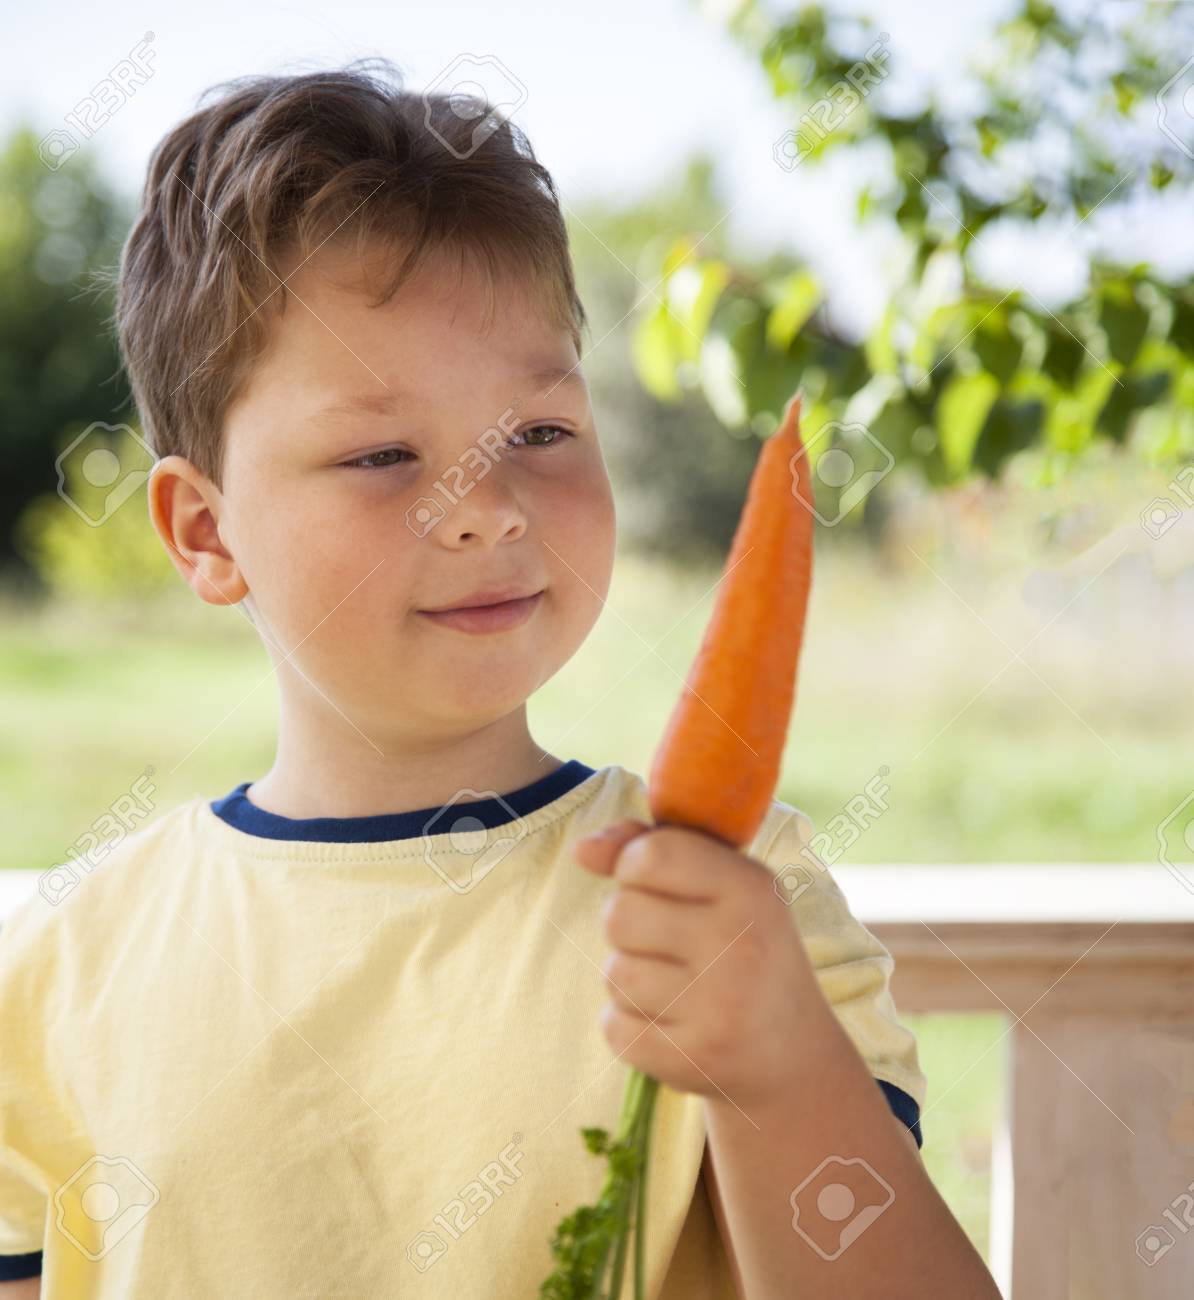 113429690-happy-boy-biting-the-carrot-a-child-with-a-vegetable-kid-eating-fresh-carrots.jpg